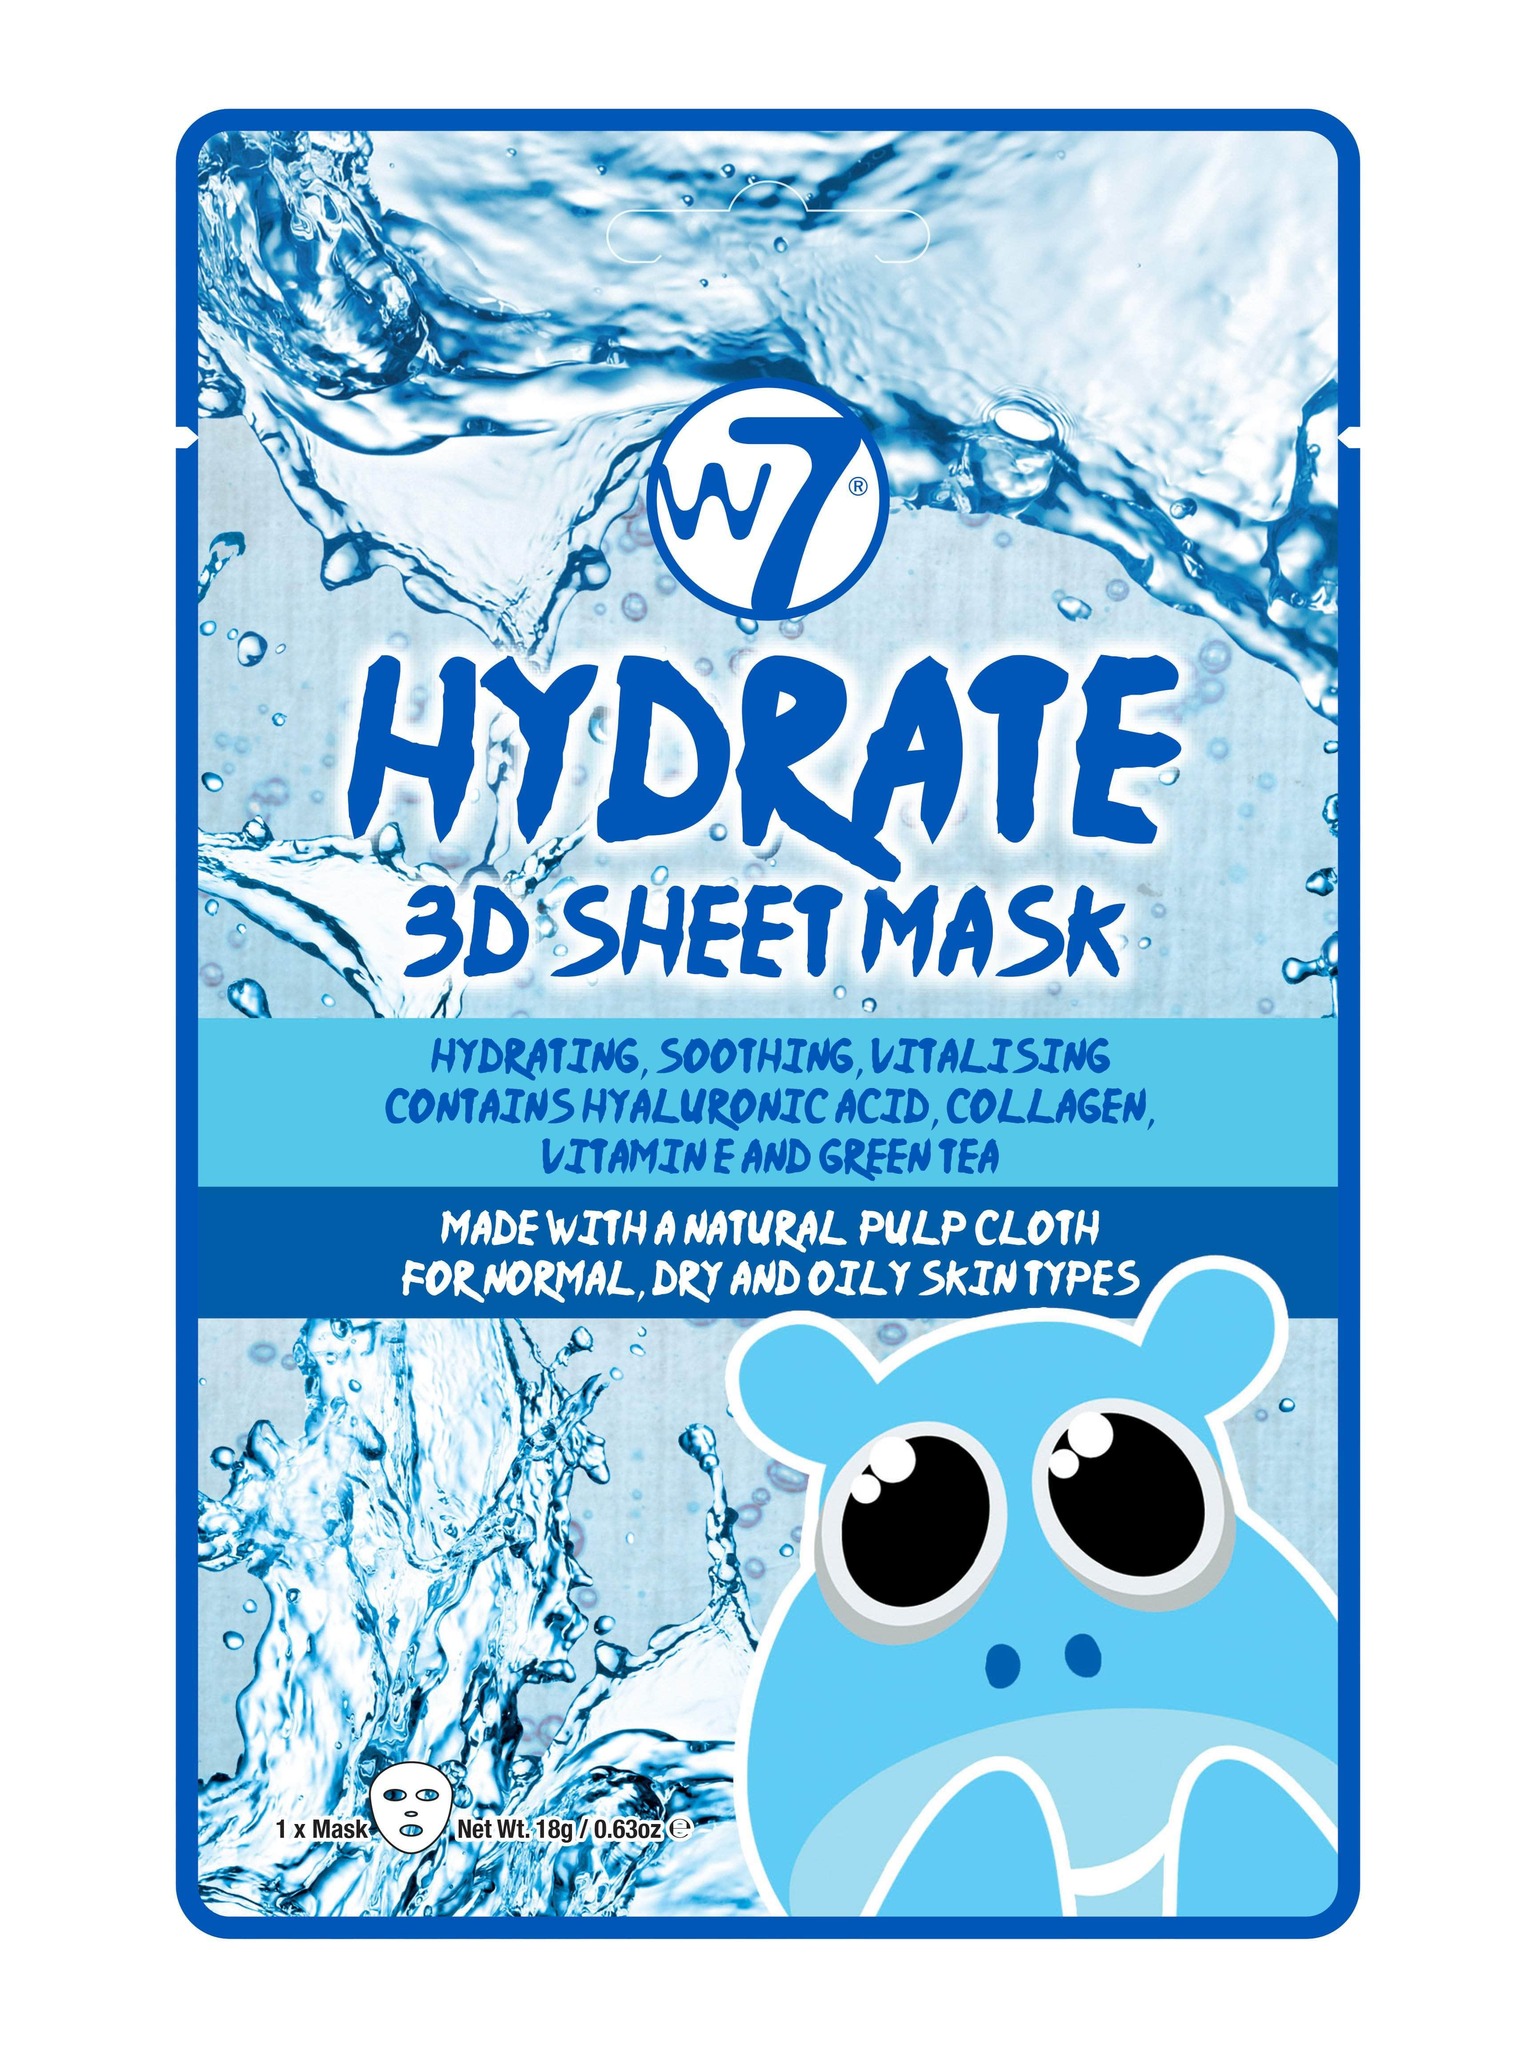 W7 Hydrate 3D Sheet Face Mask